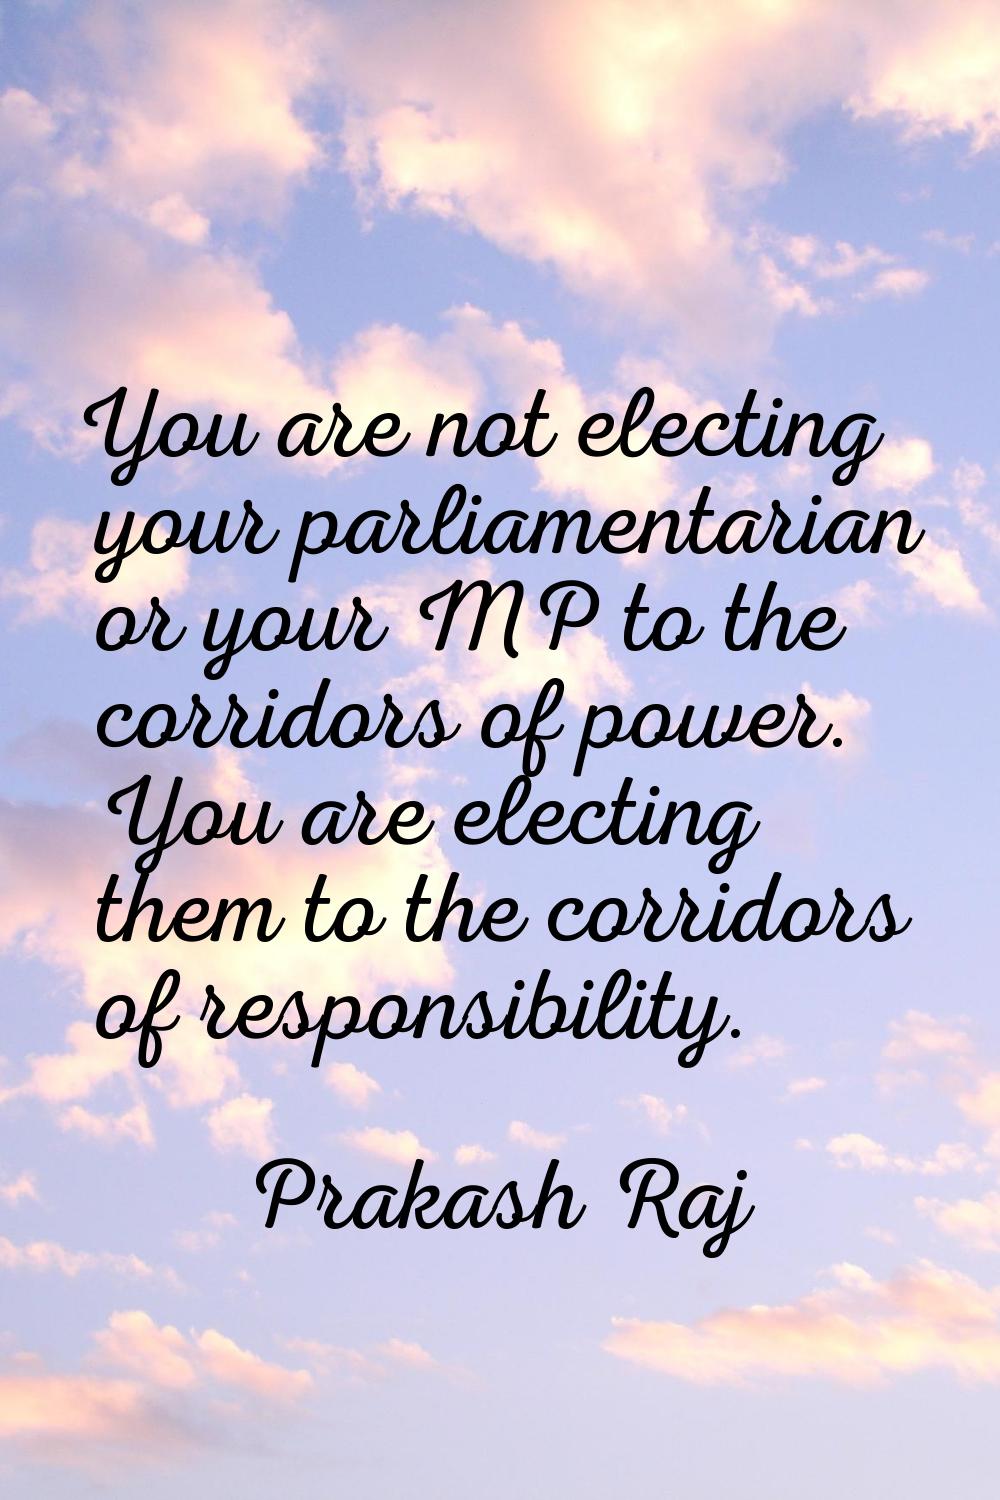 You are not electing your parliamentarian or your MP to the corridors of power. You are electing th